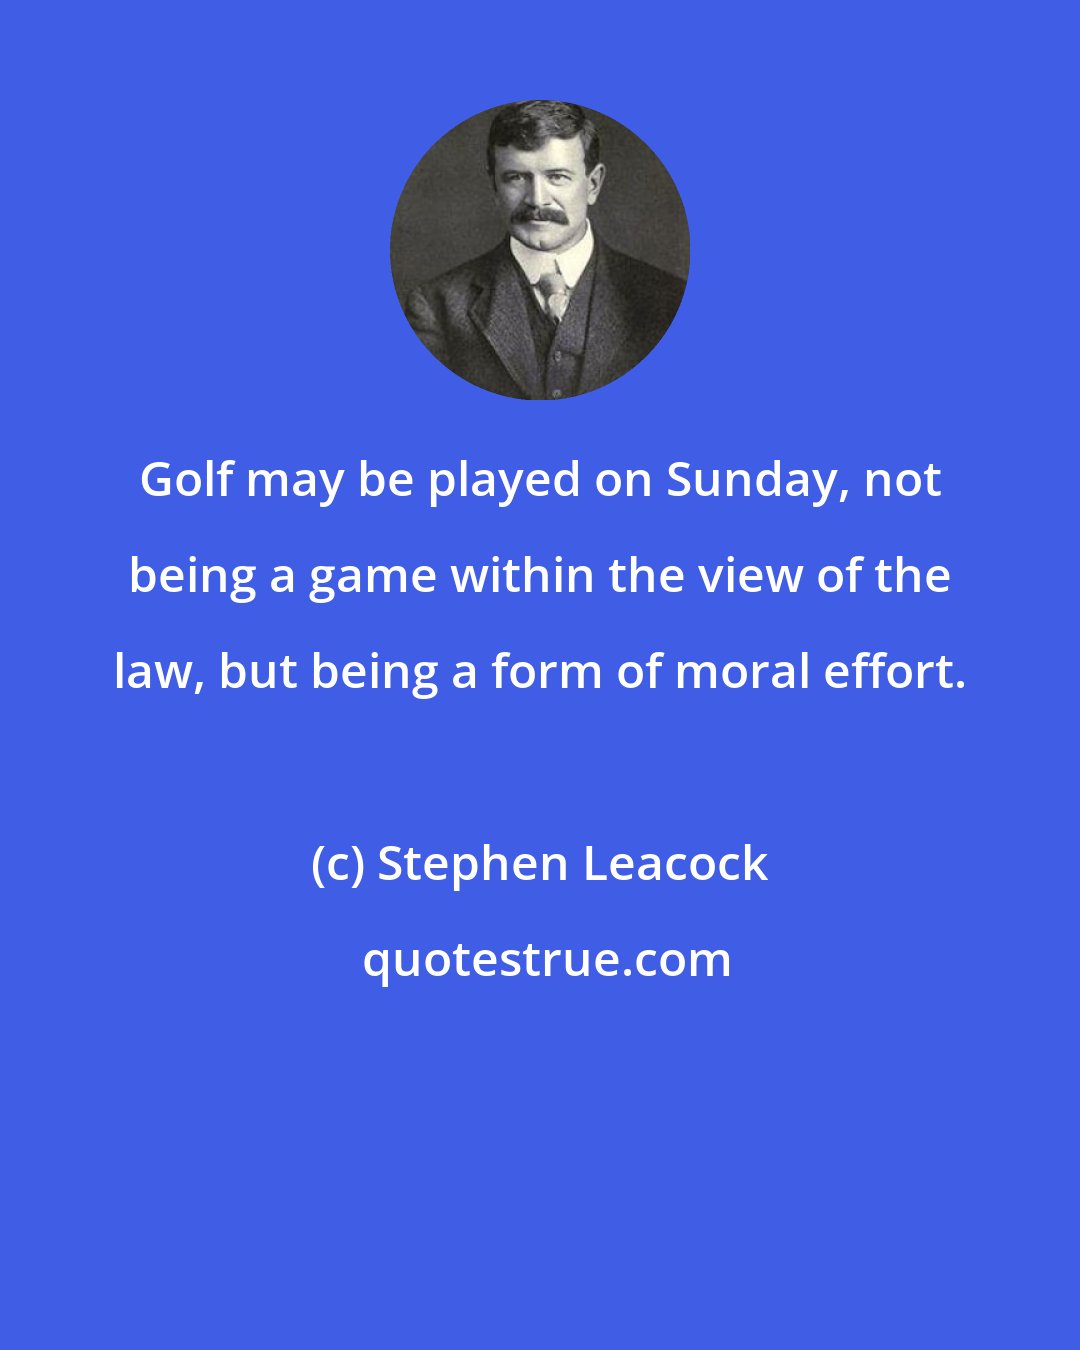 Stephen Leacock: Golf may be played on Sunday, not being a game within the view of the law, but being a form of moral effort.